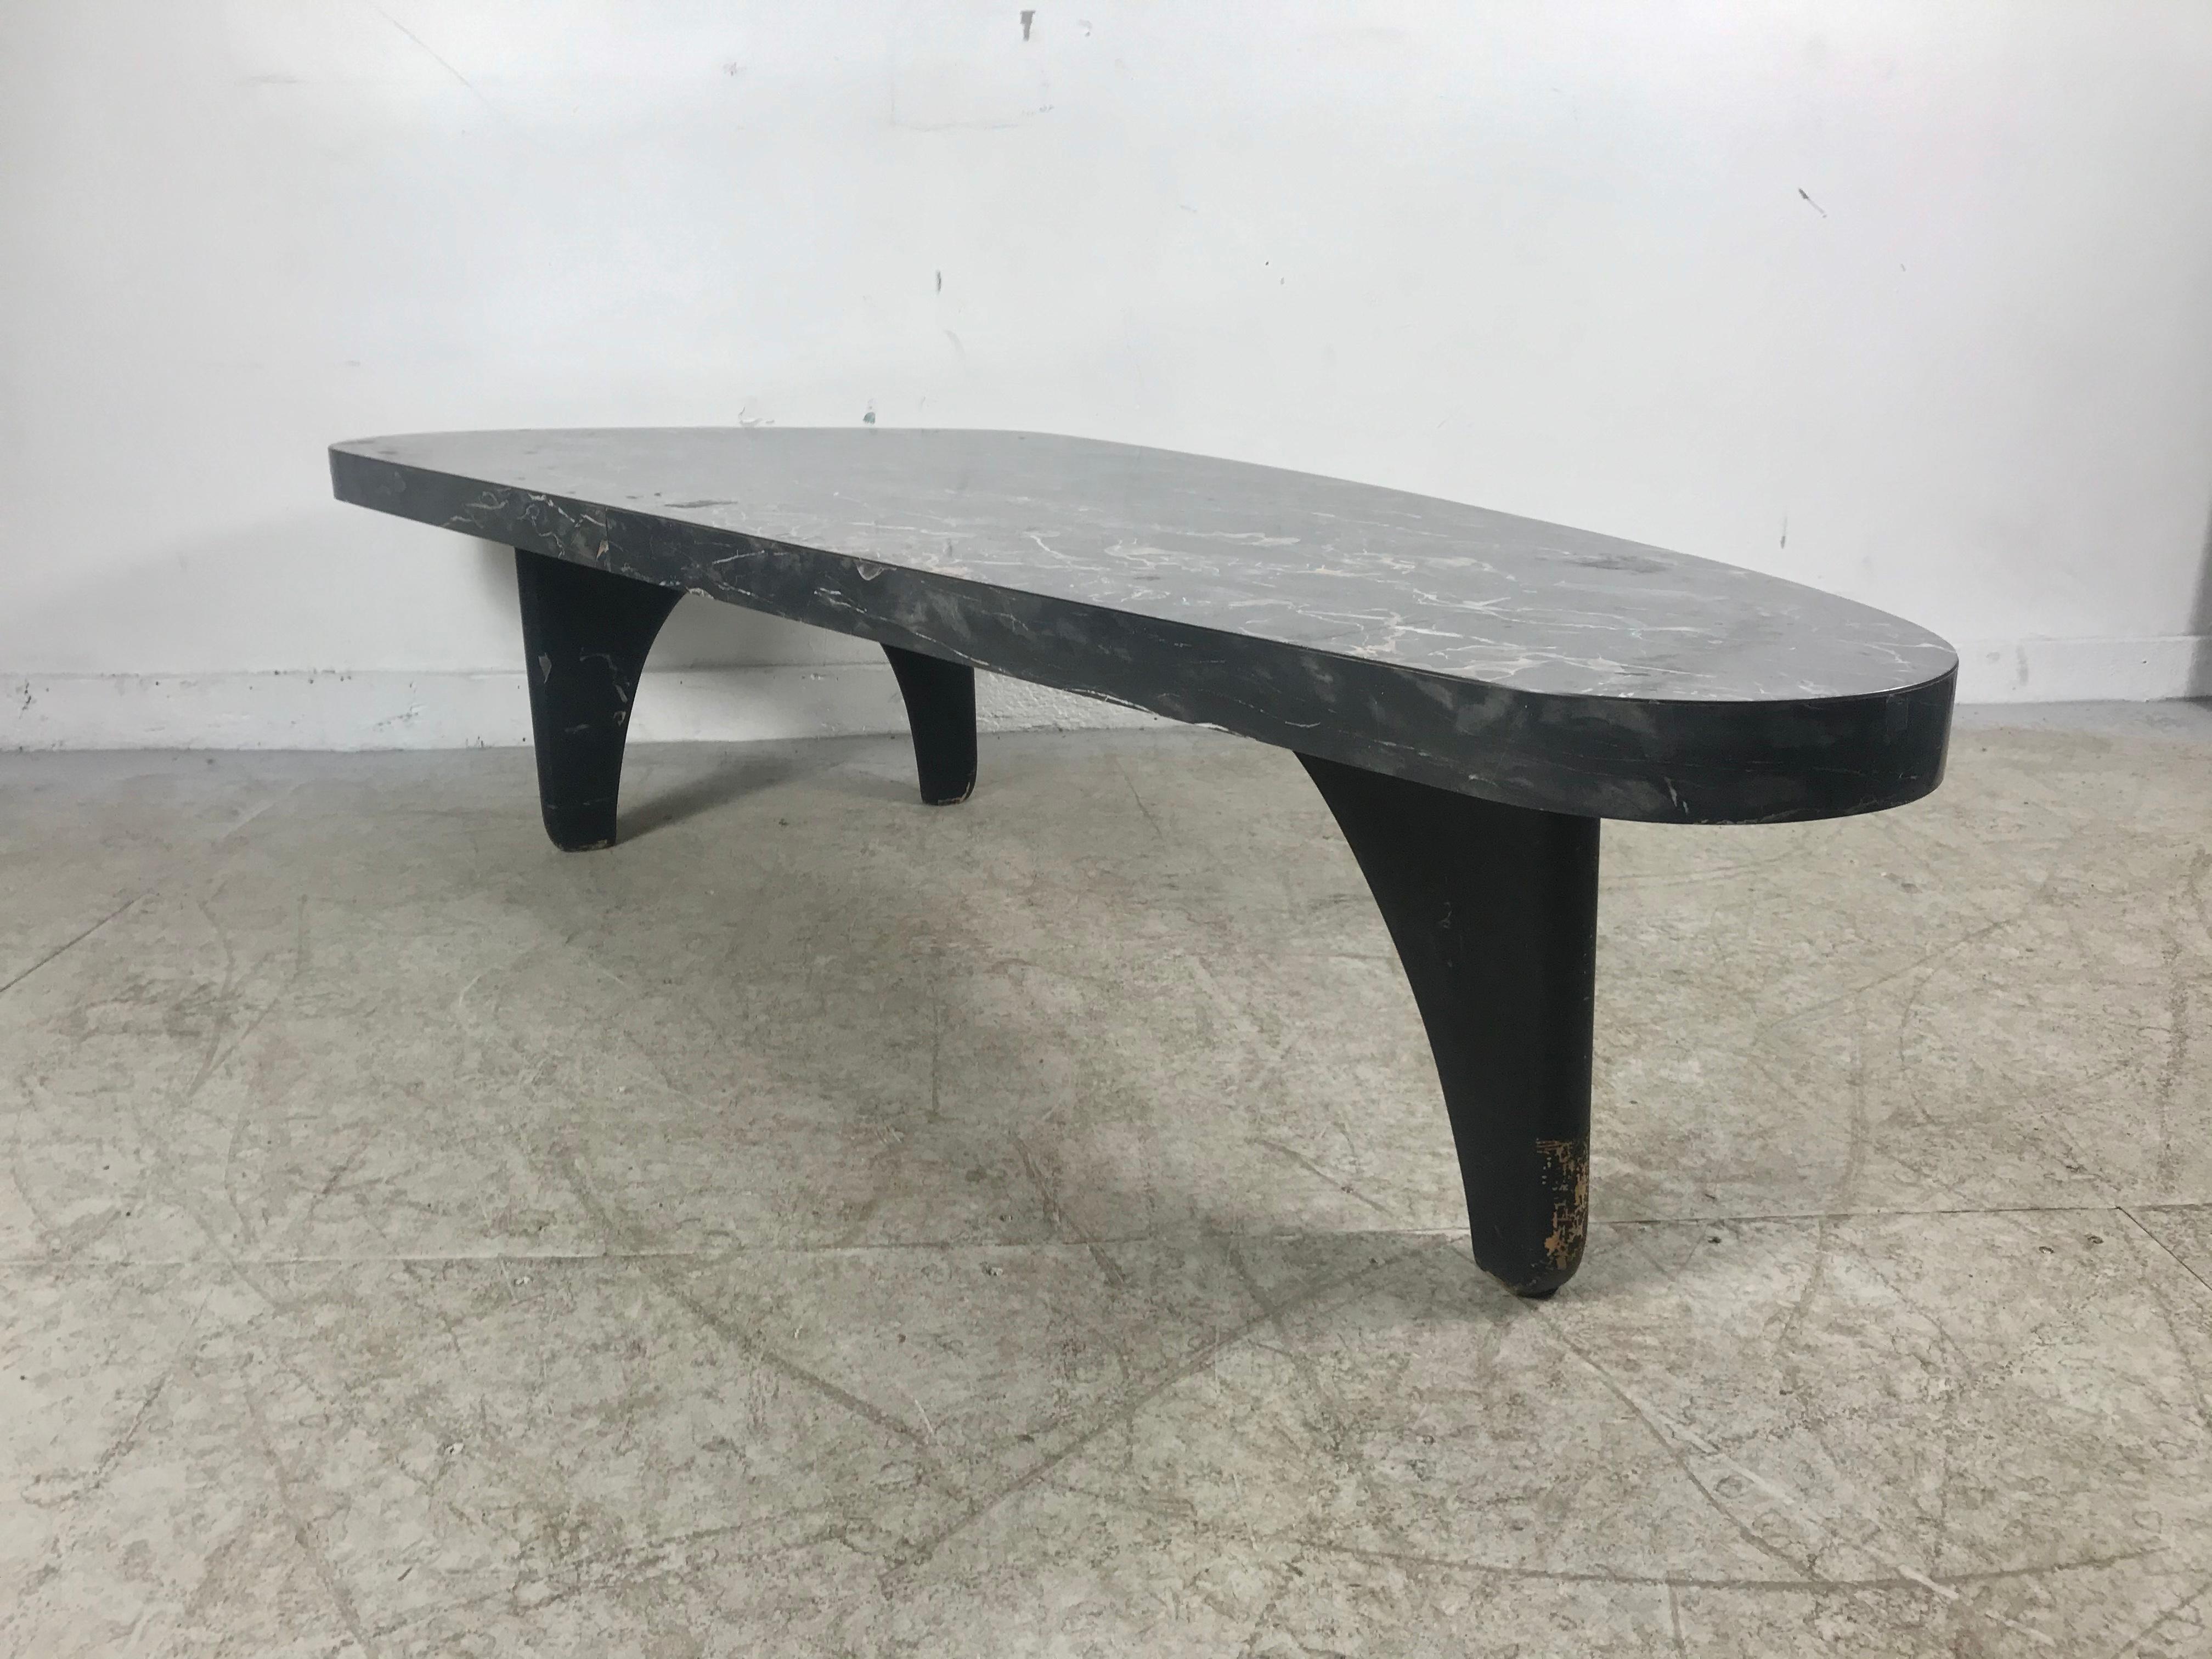 Classic Mid-Century Modern Asymmetric, kidney shape cocktail/ coffee table attributed to Adrian Pearsall, Very Noguchi Stunning laminate formica faux marble top, solid sculptural walnut base, lacquered black. Makes a statement, minor flaw to